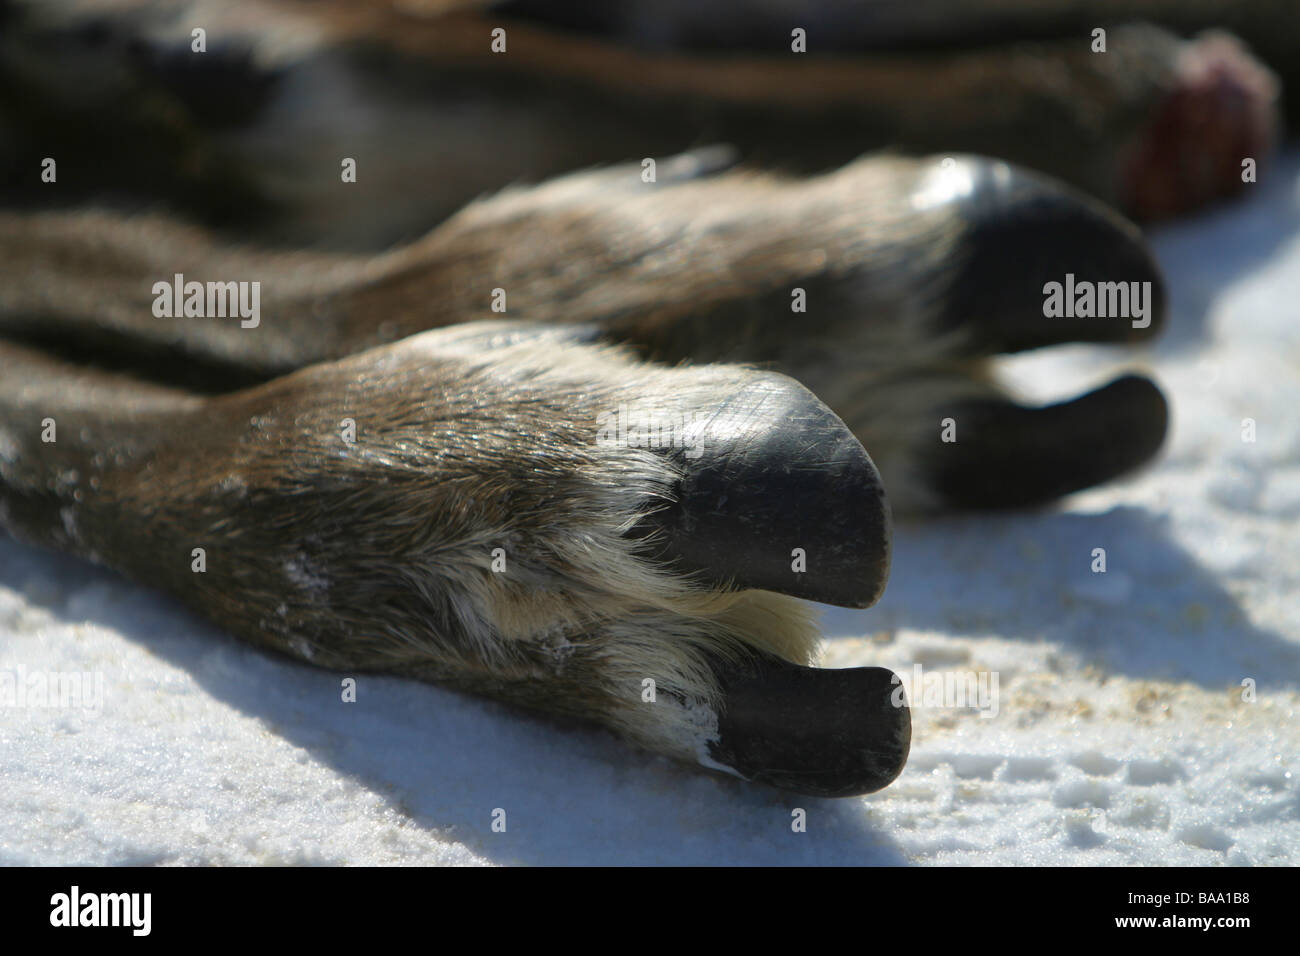 Porcupine caribou legs and hooves in Old Crow, Yukon Territory, Canada. Stock Photo